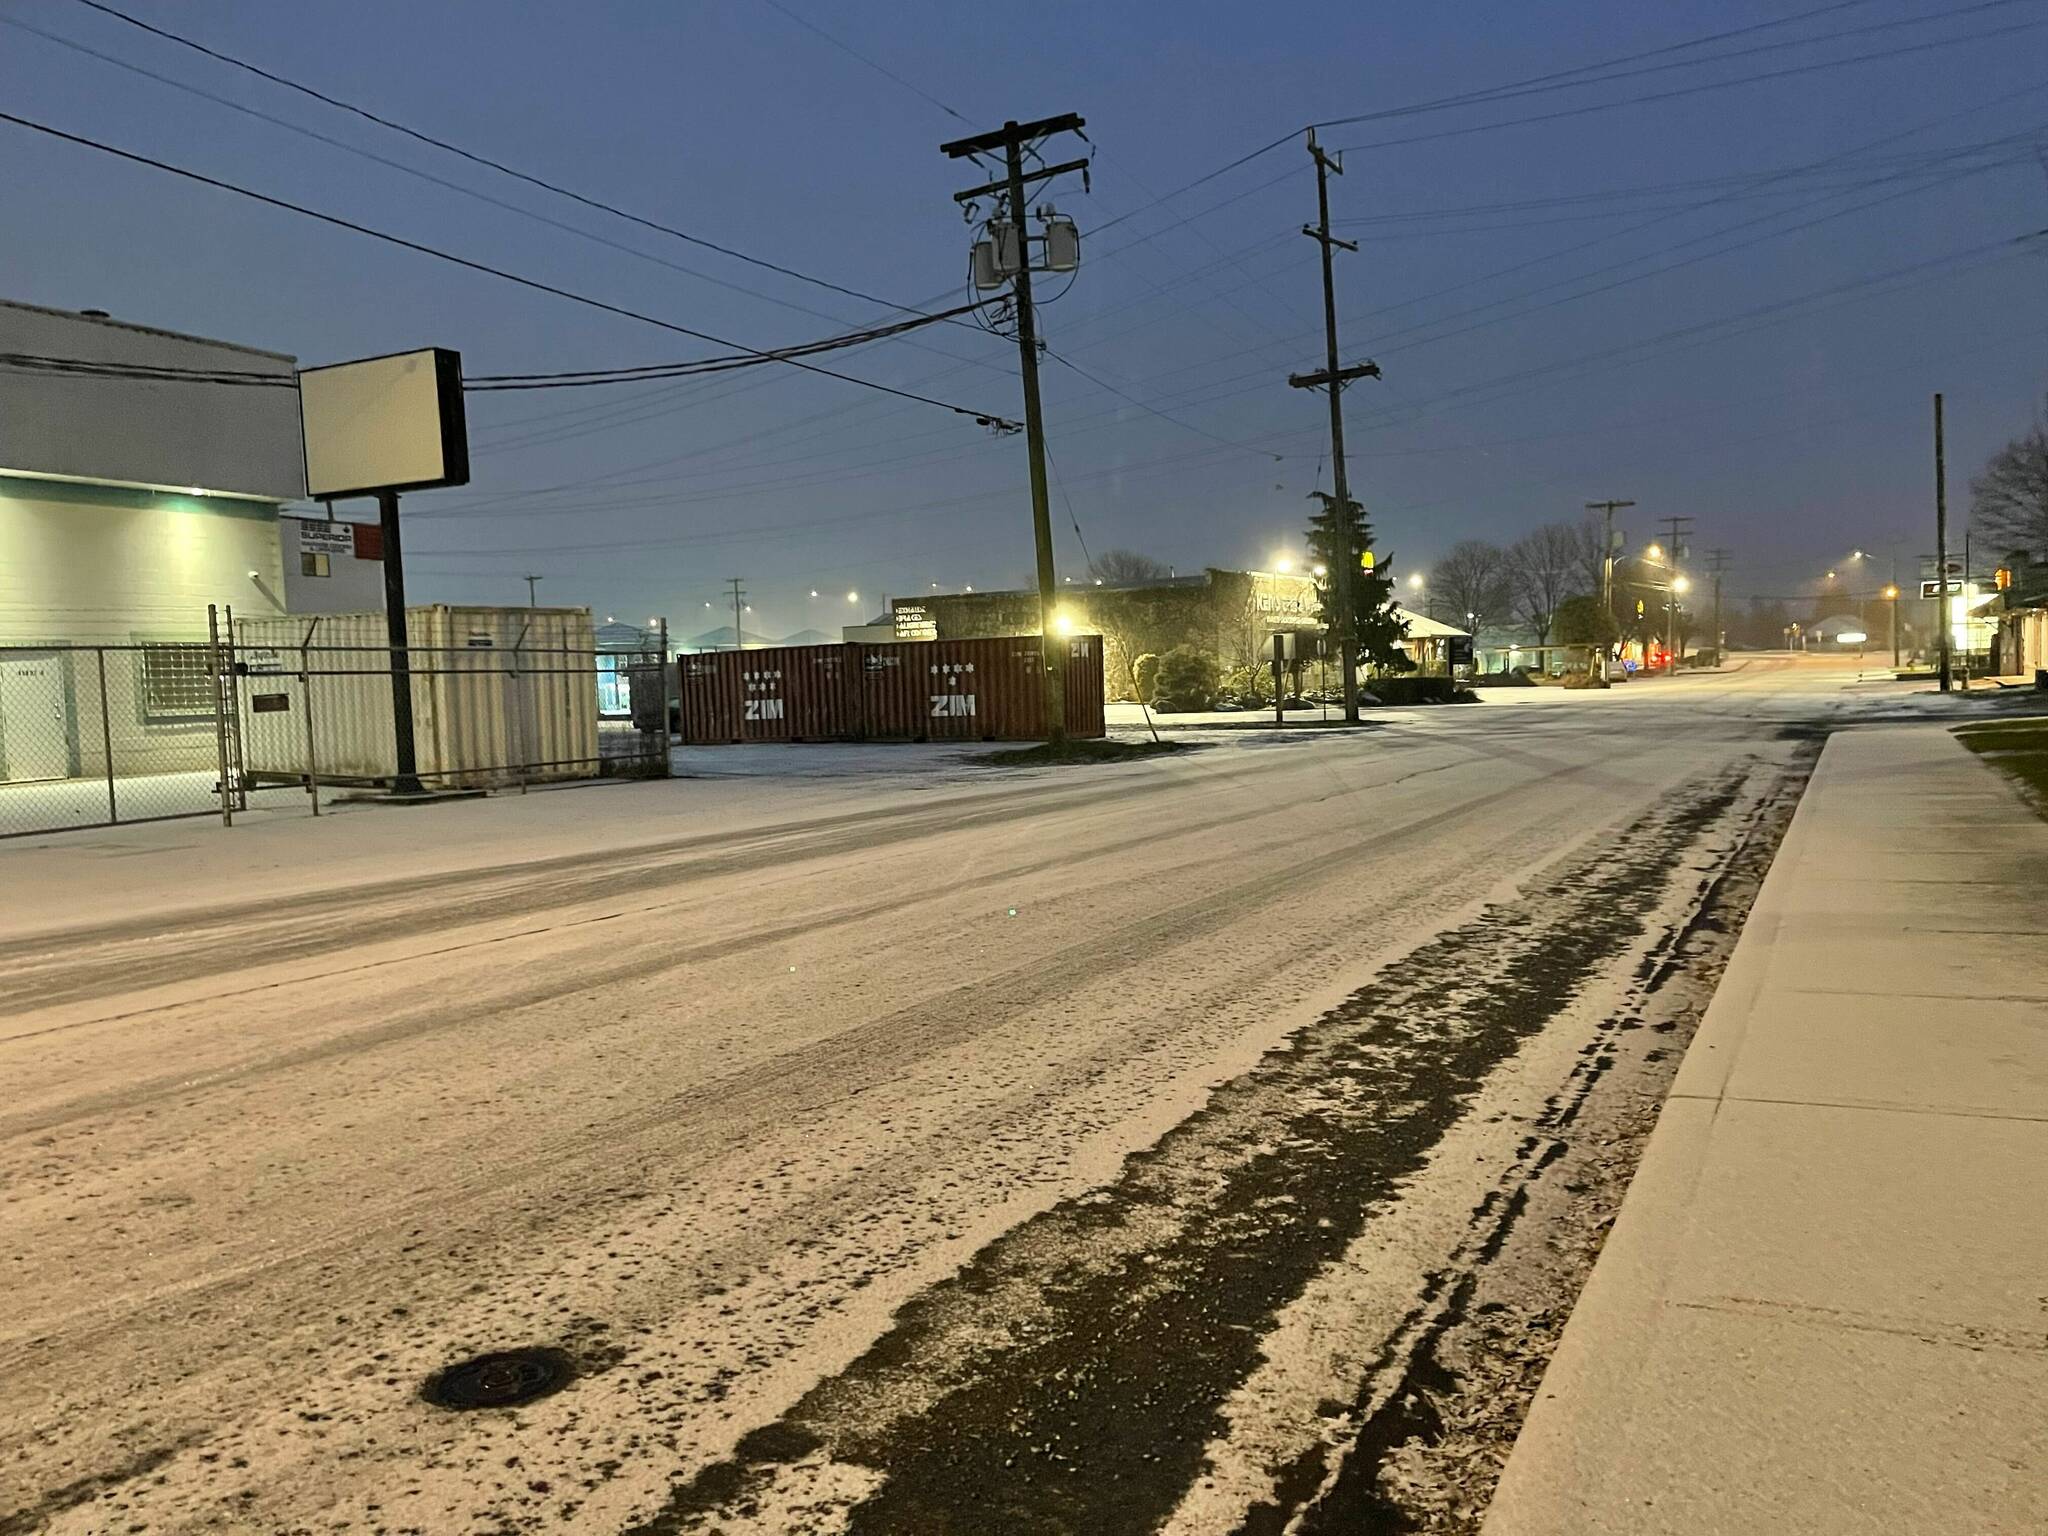 Snow fell on the Lower Mainland overnight on Tuesday (Jan. 31) with flurries expected to continue this morning. Pictured: Alexander Avenue in Chilliwack. /Jennifer Feinberg Photo